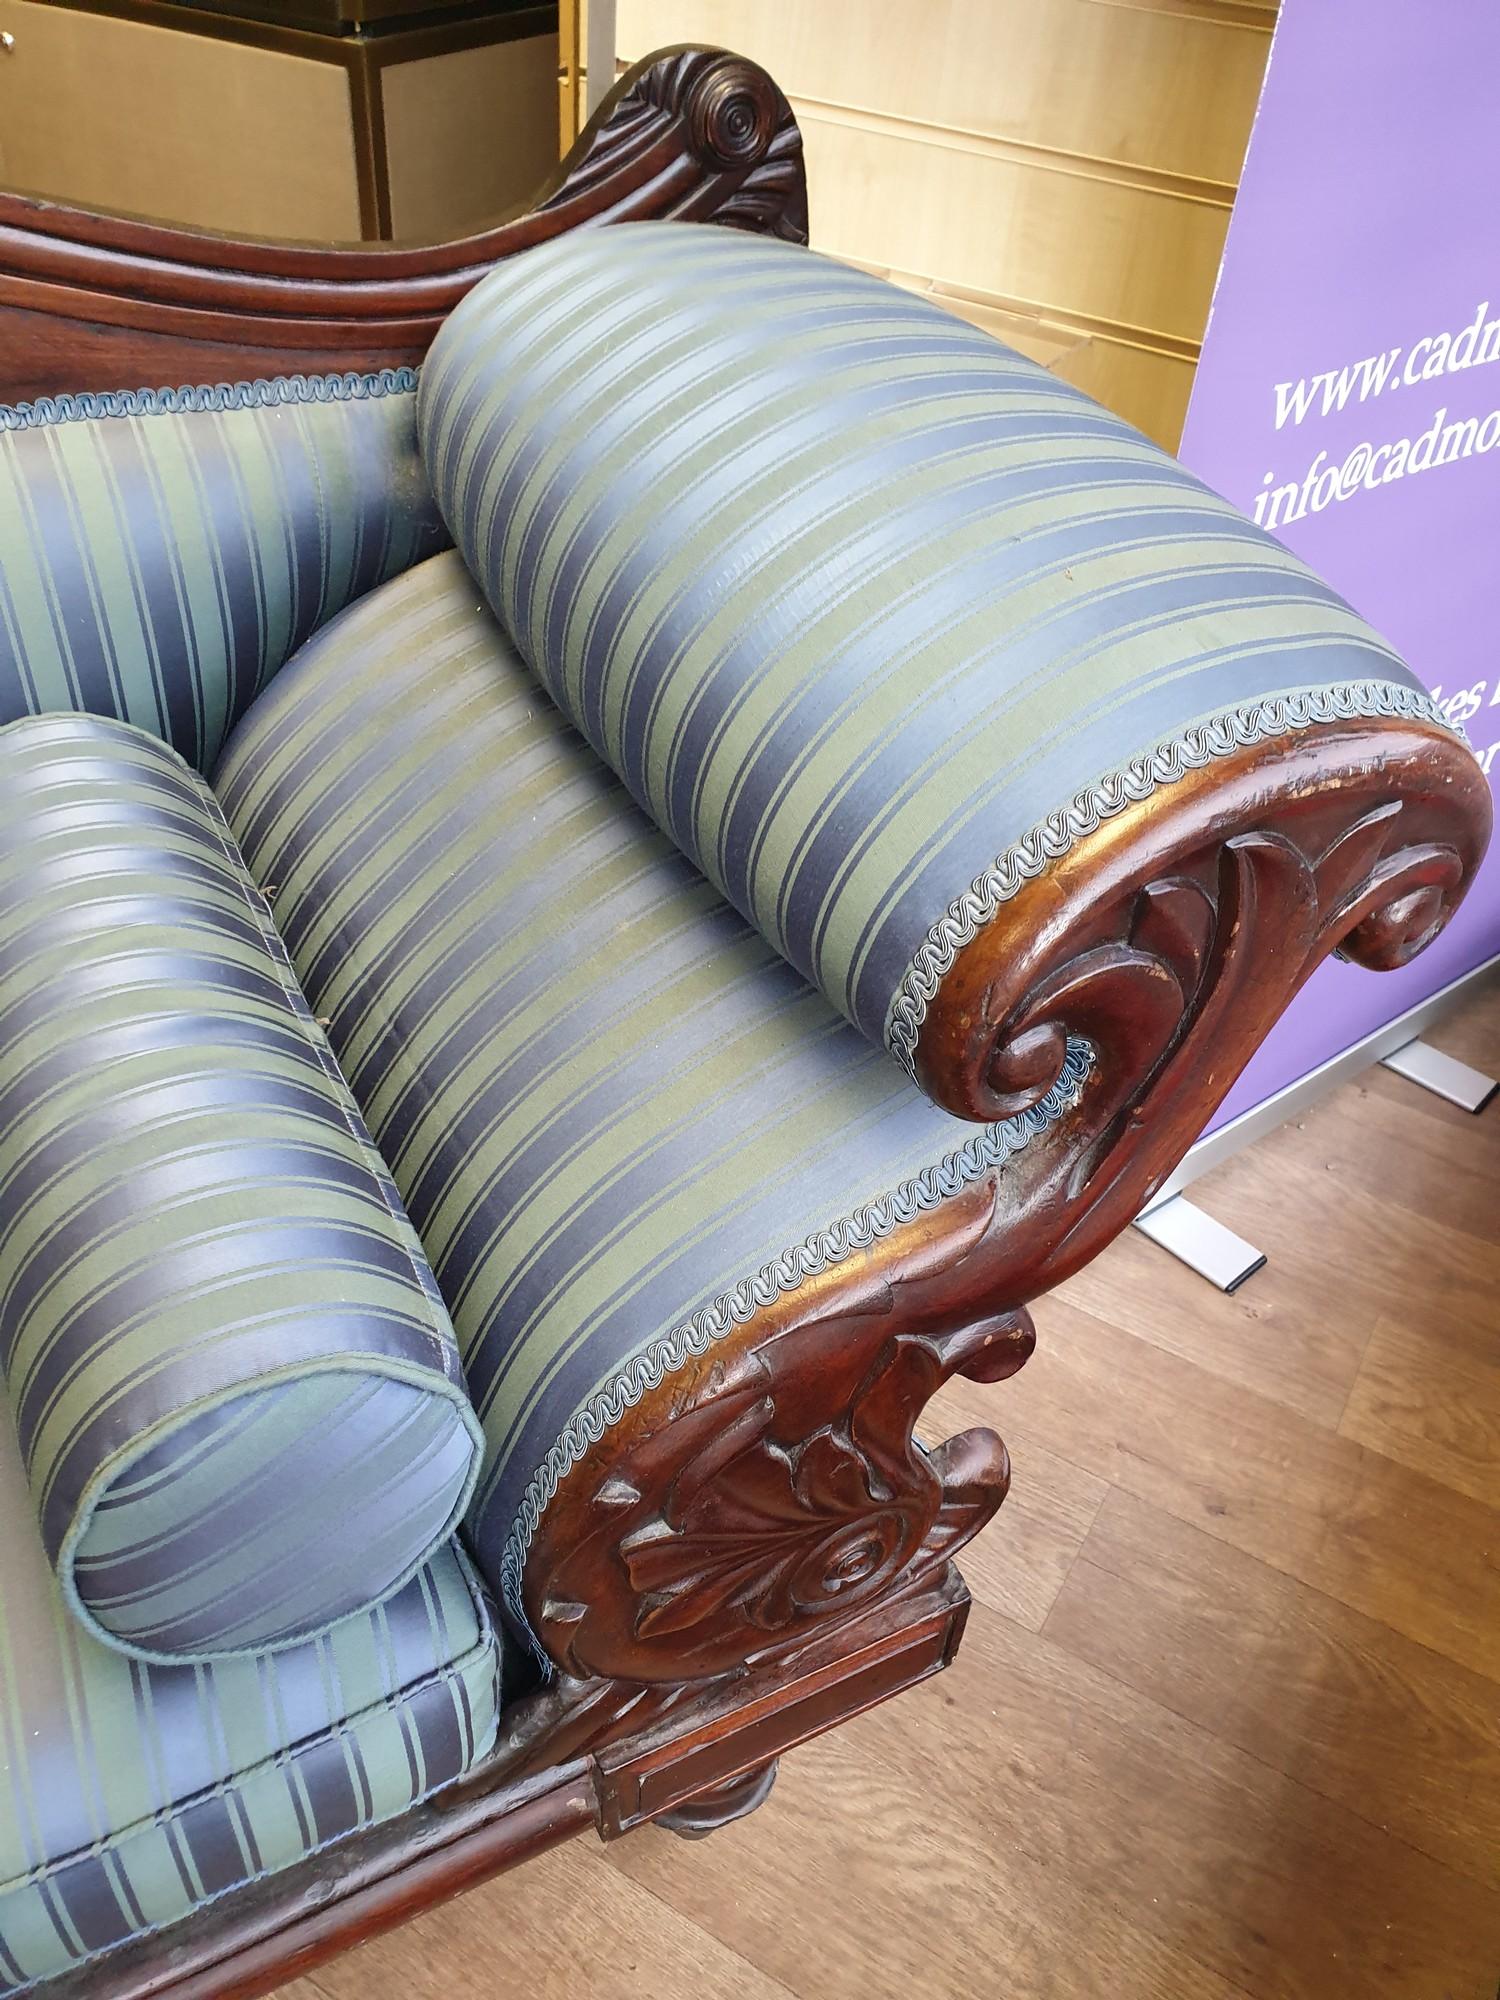 Victorian Handmade Sofa on Casters, been sympathetically restored with a blue satin stripe finish, - Image 5 of 16